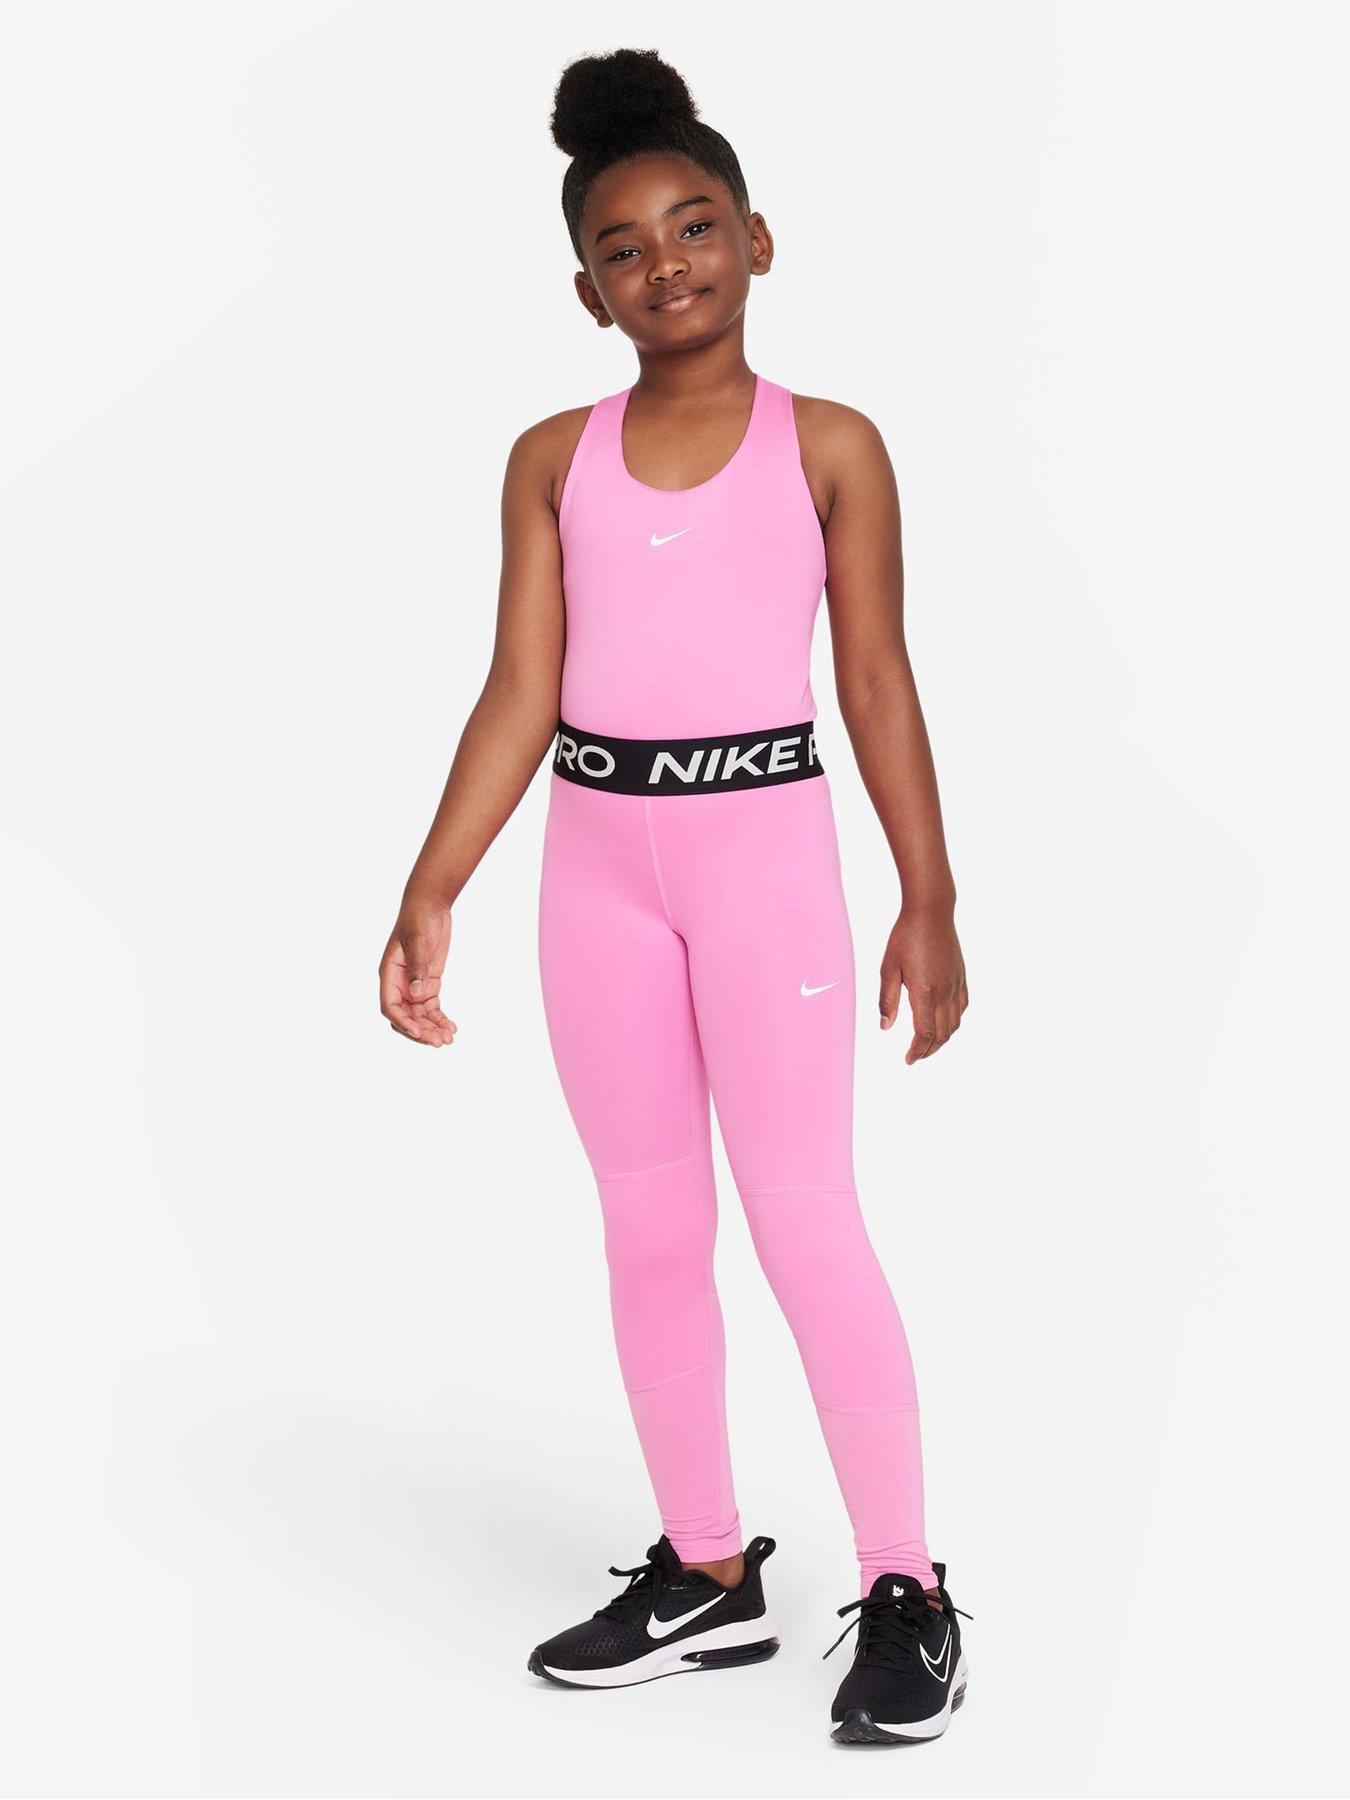 Nike Plus Pro 365 Leggings With Pink Waist Band In Black